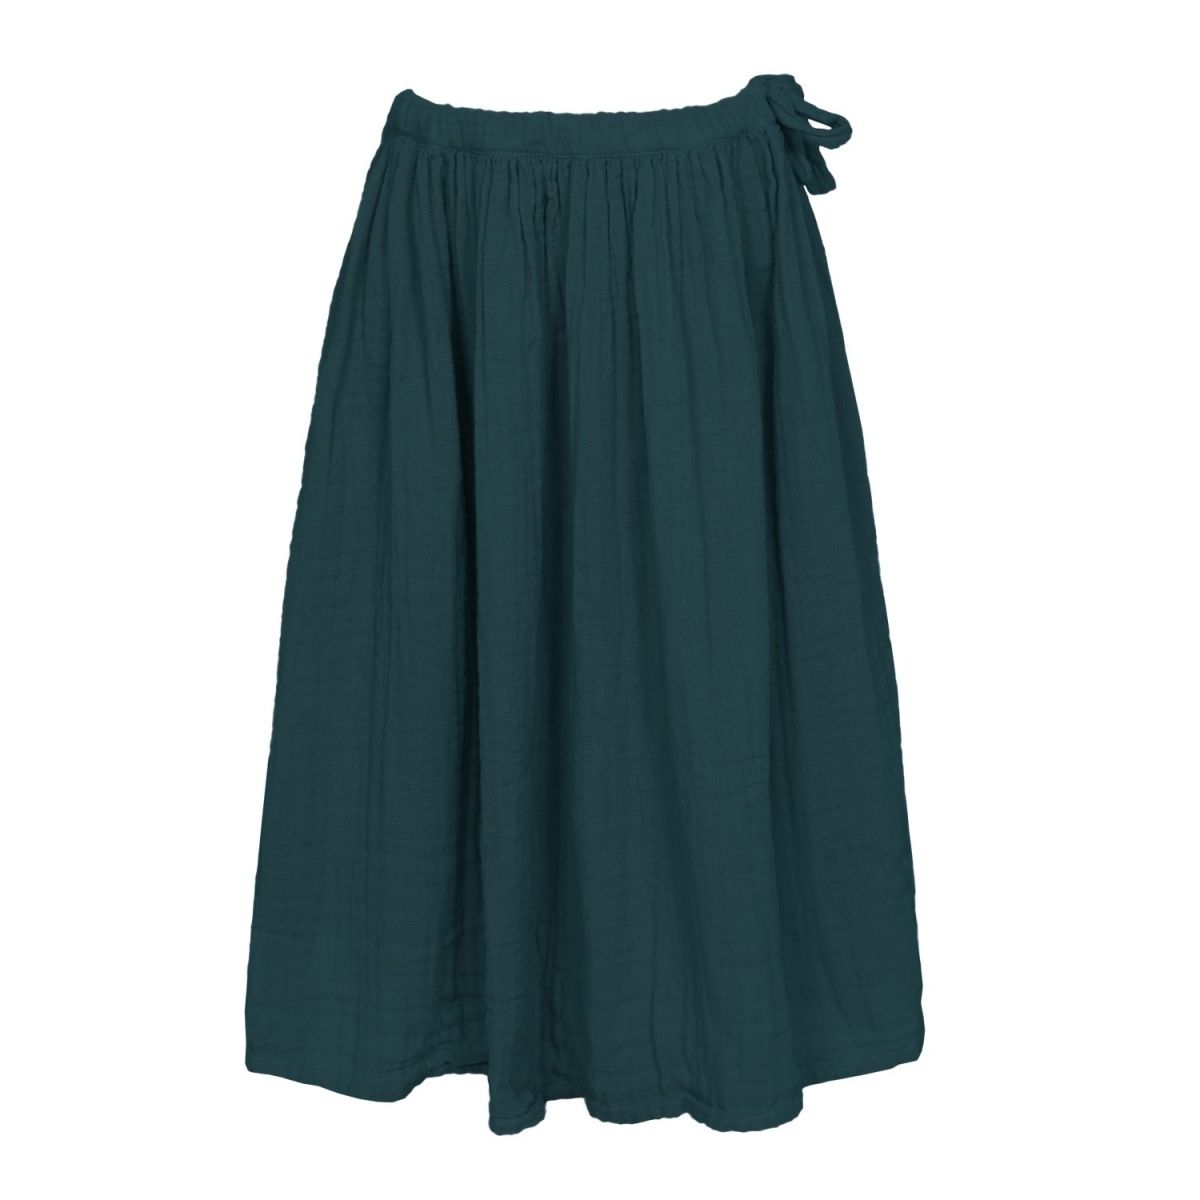 Numero 74 - Skirt for girls Ava long teal blue - Юбки и шорты - 1